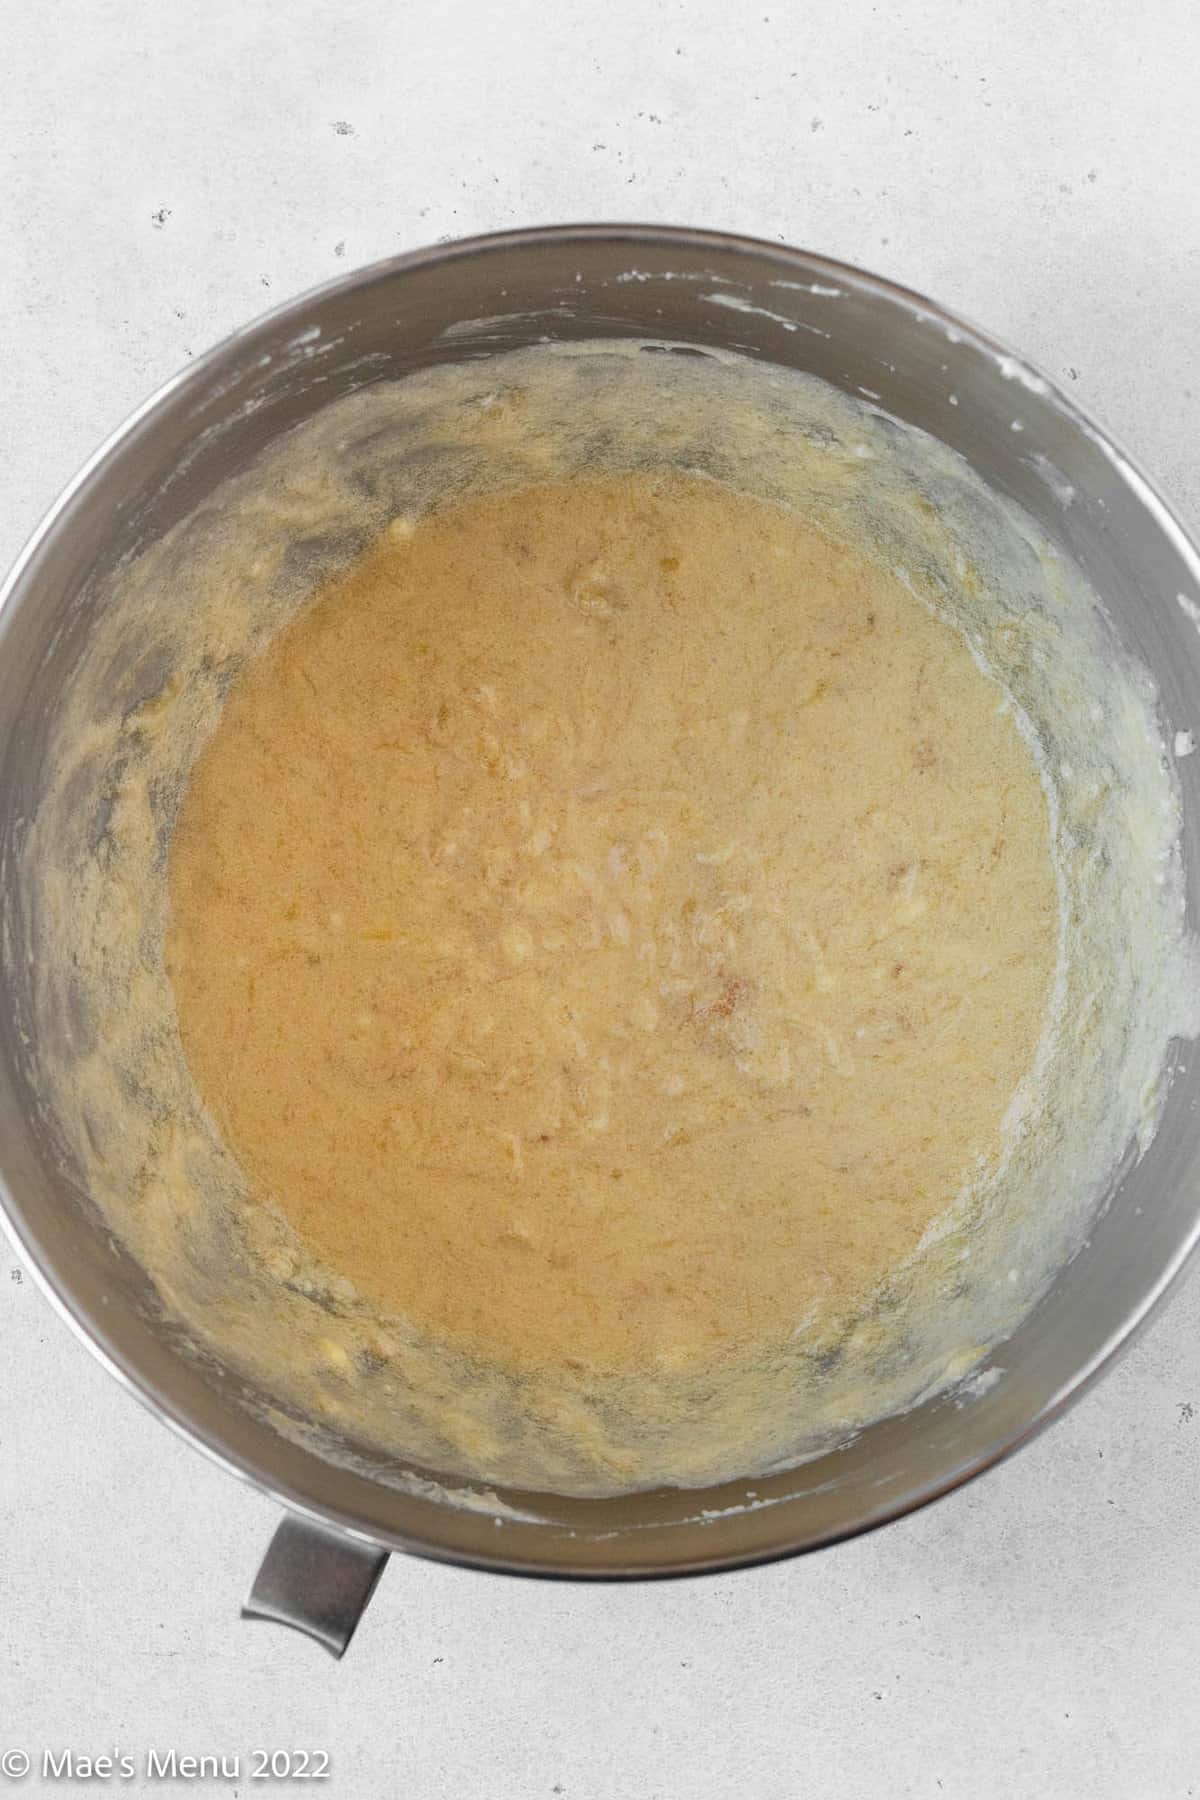 Banana bread batter before stirring in the flour mixture.